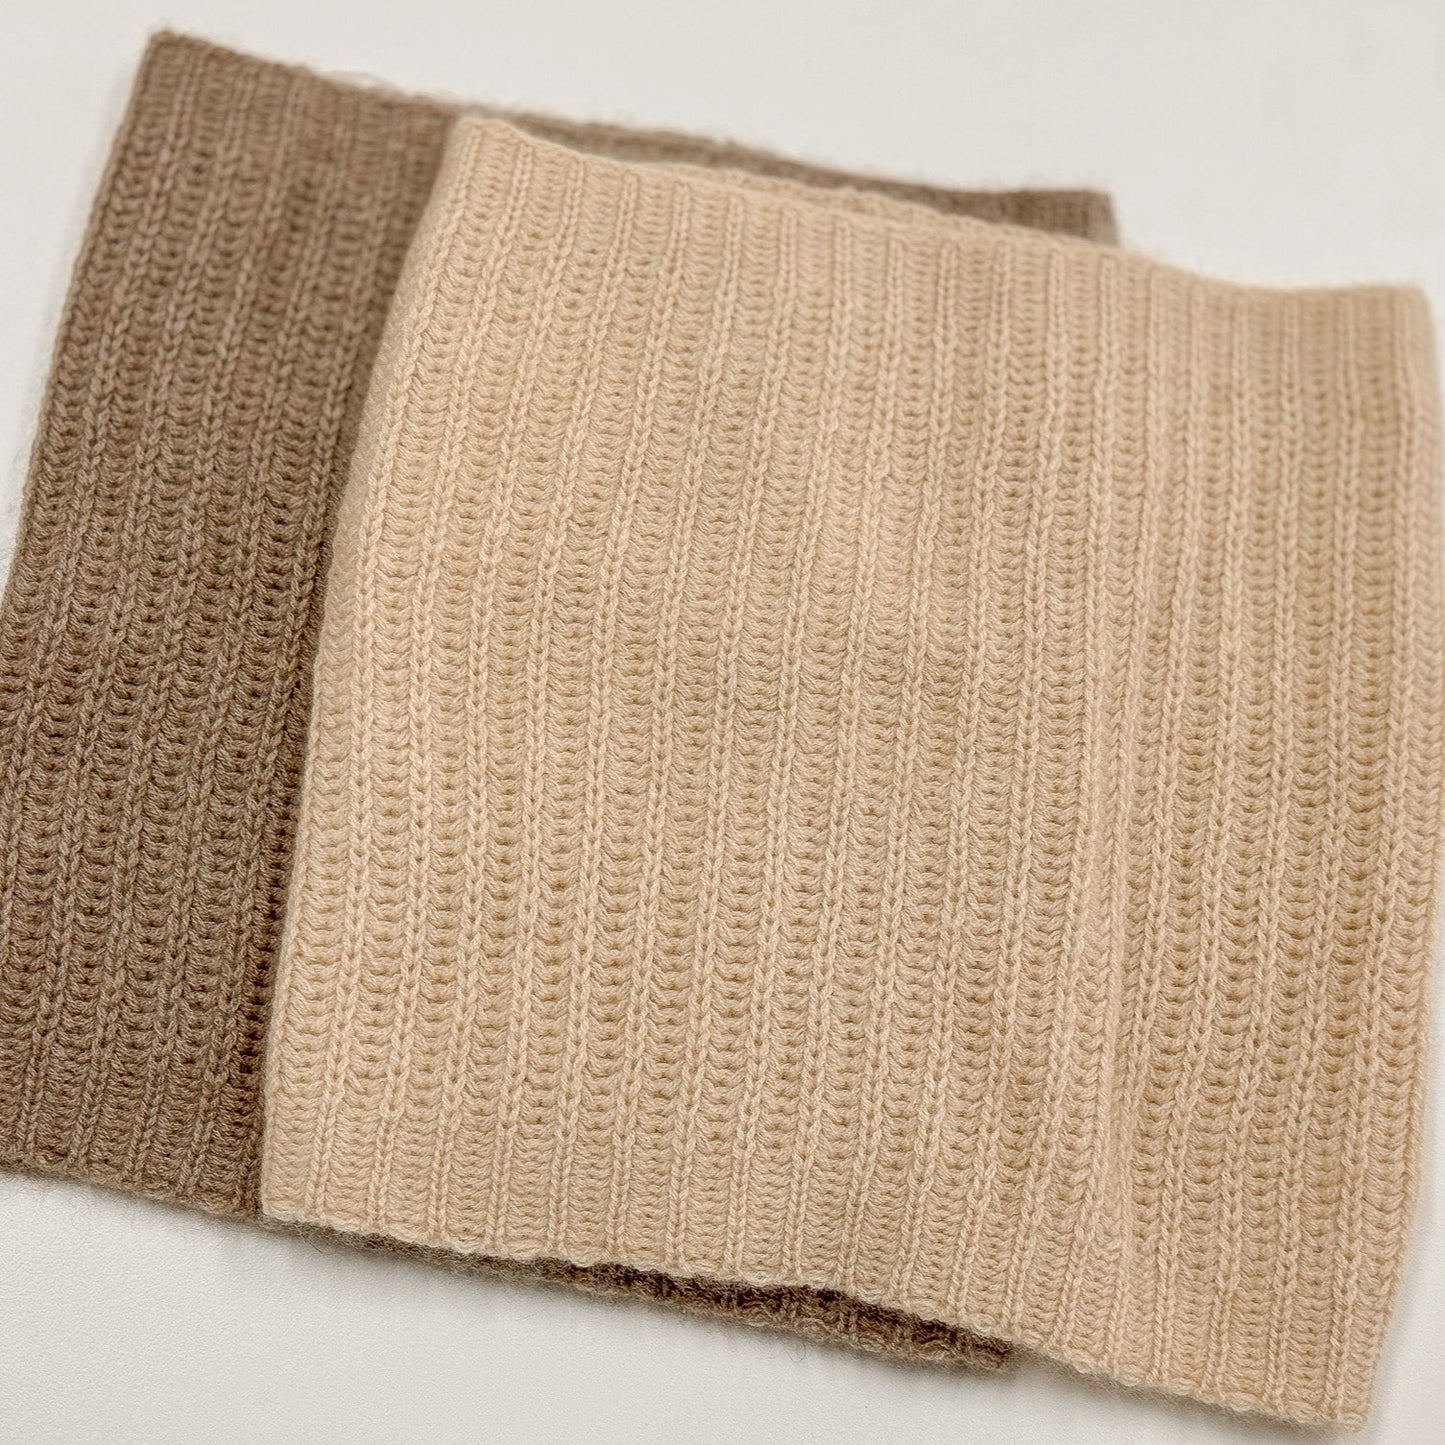 Taupe Brown and Oatmeal Beige Cashmere Infiniti Scarf layered on top of each other